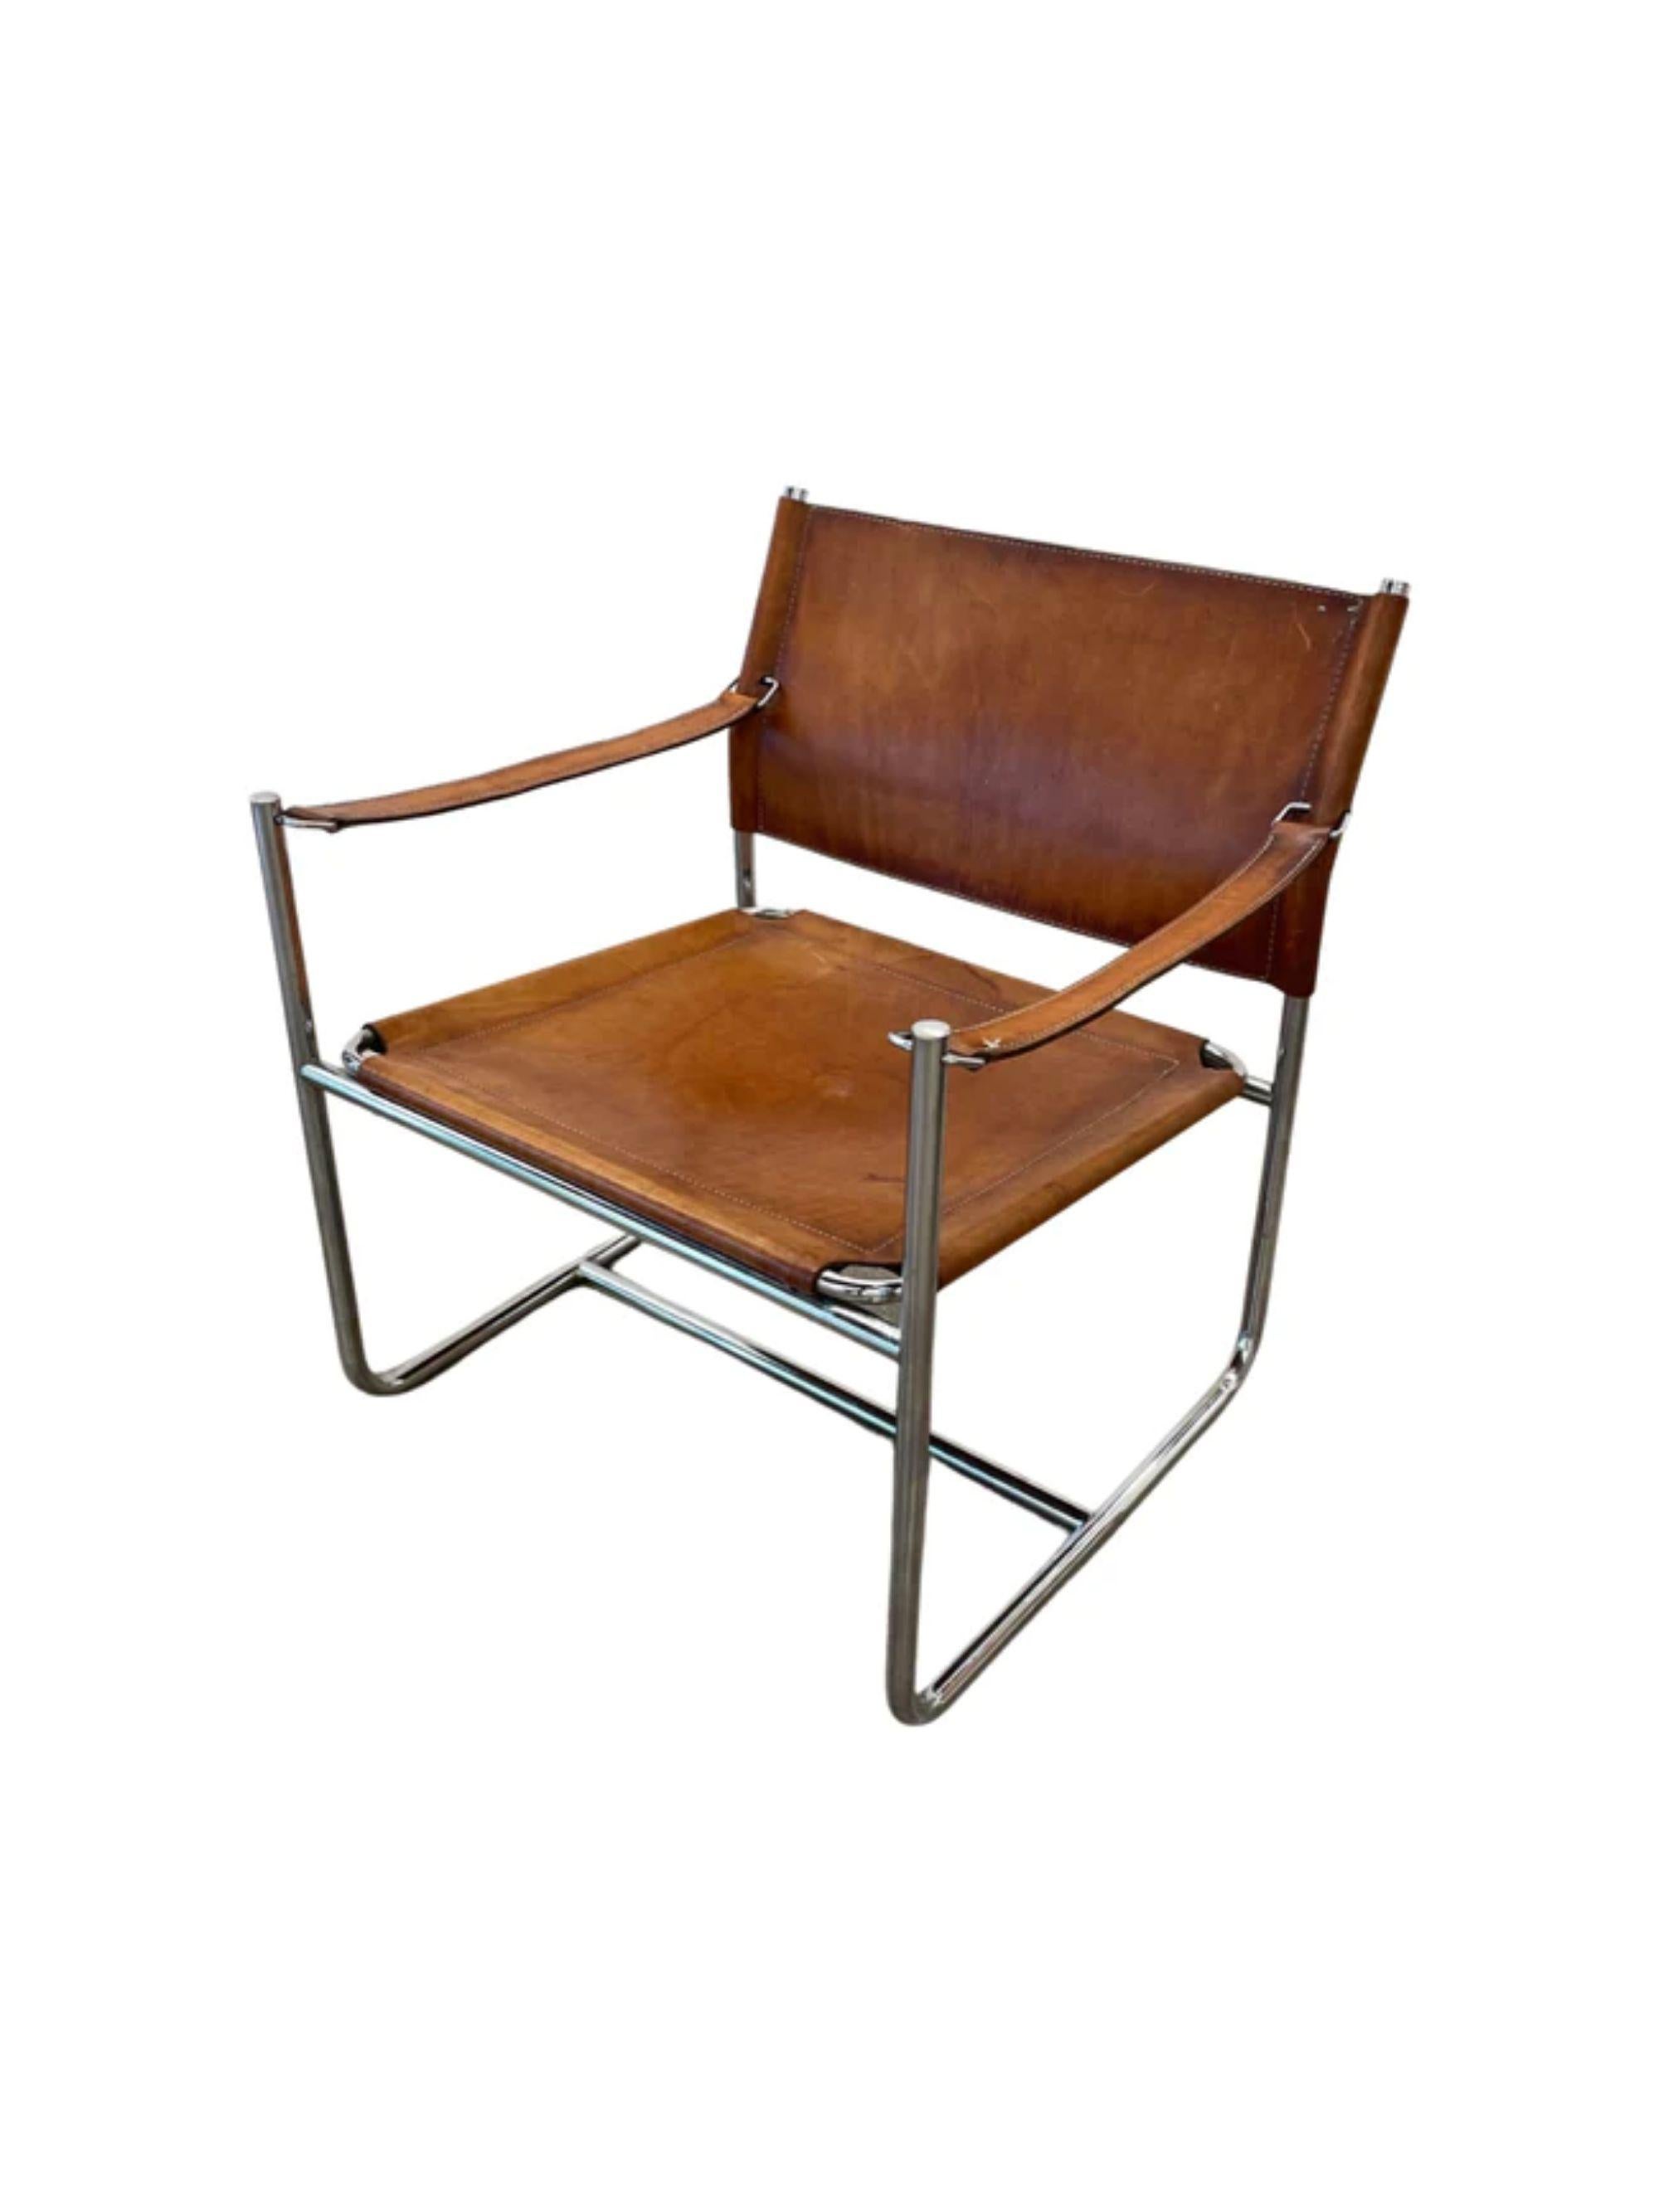 Karin Mobring pair of leather “Amiral” lounge chairs, Sweden, 1970s

Additional Information:
Materials: Leather, chrome-plated tubular steel, plastic
Dimensions: 28